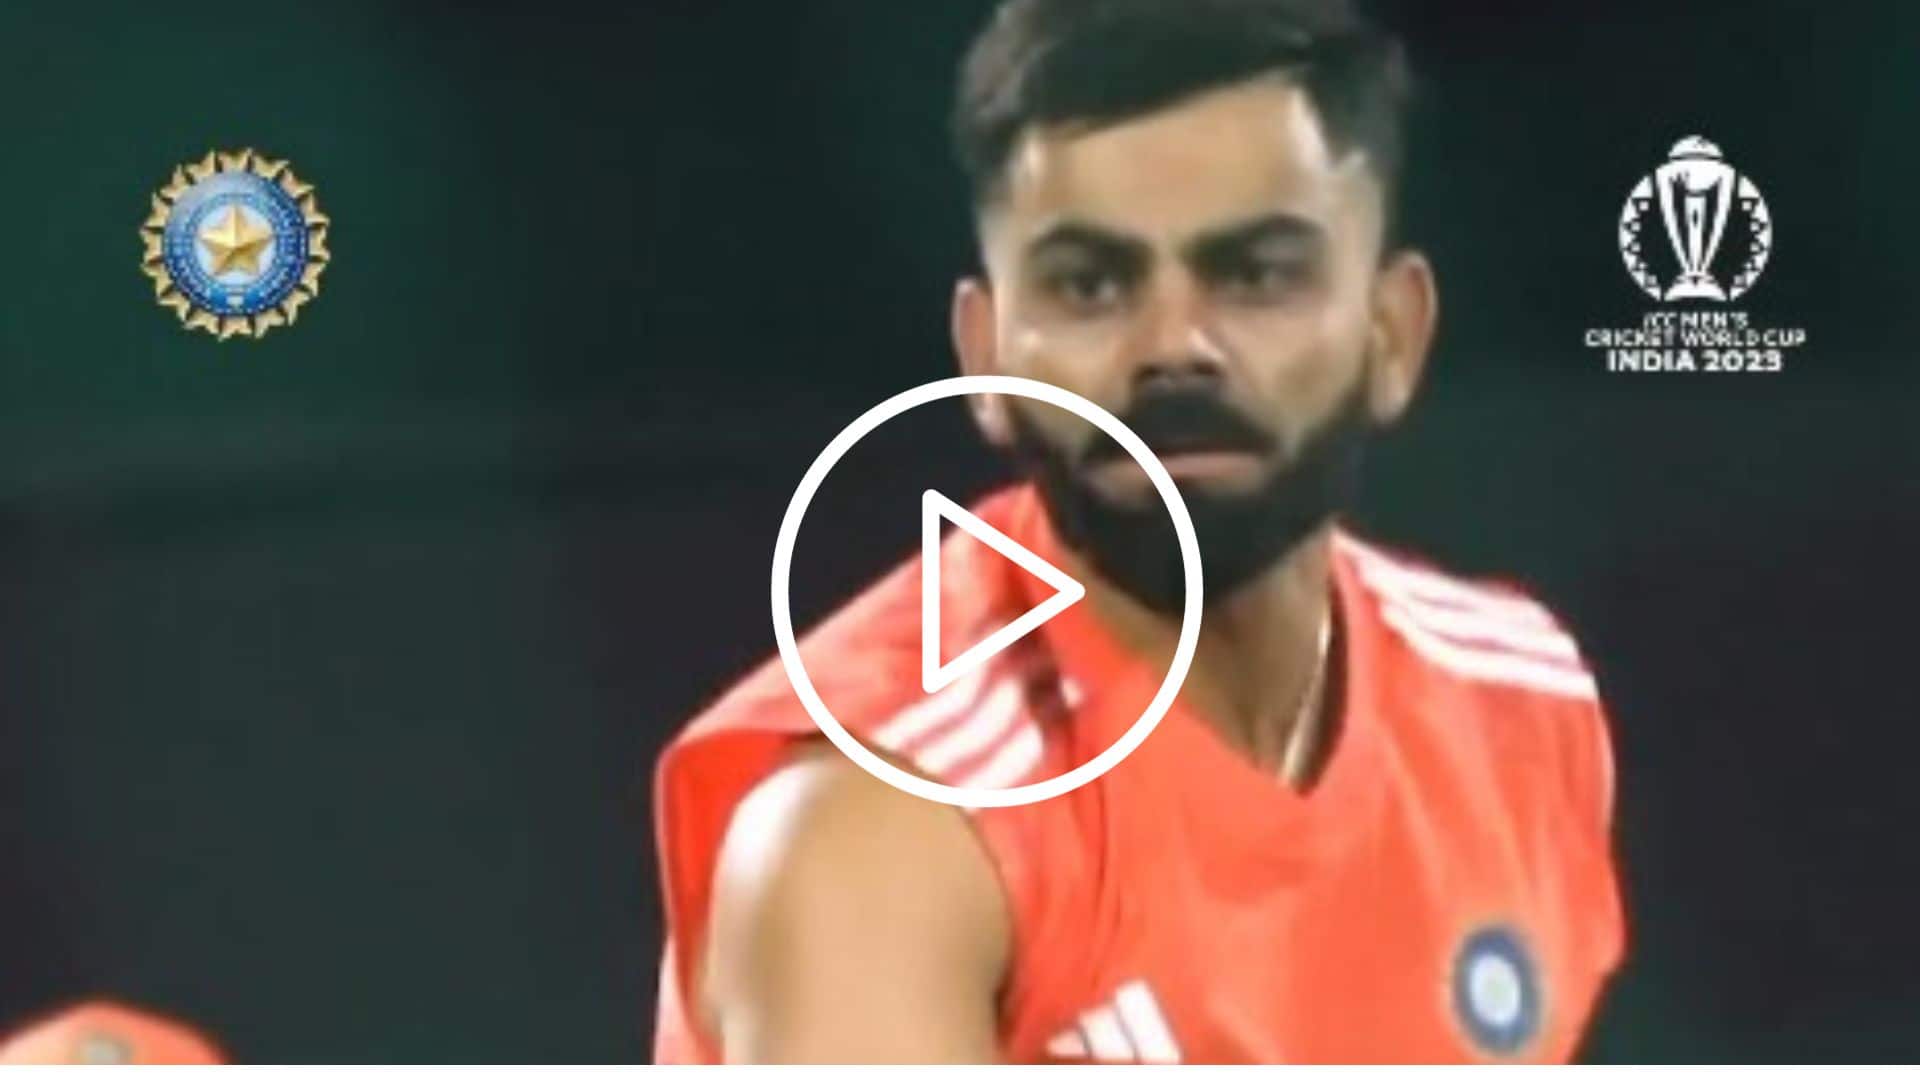 [Watch] Virat Kohli, Shubman Gill Bowl In The Nets Ahead Of IND-ENG Game